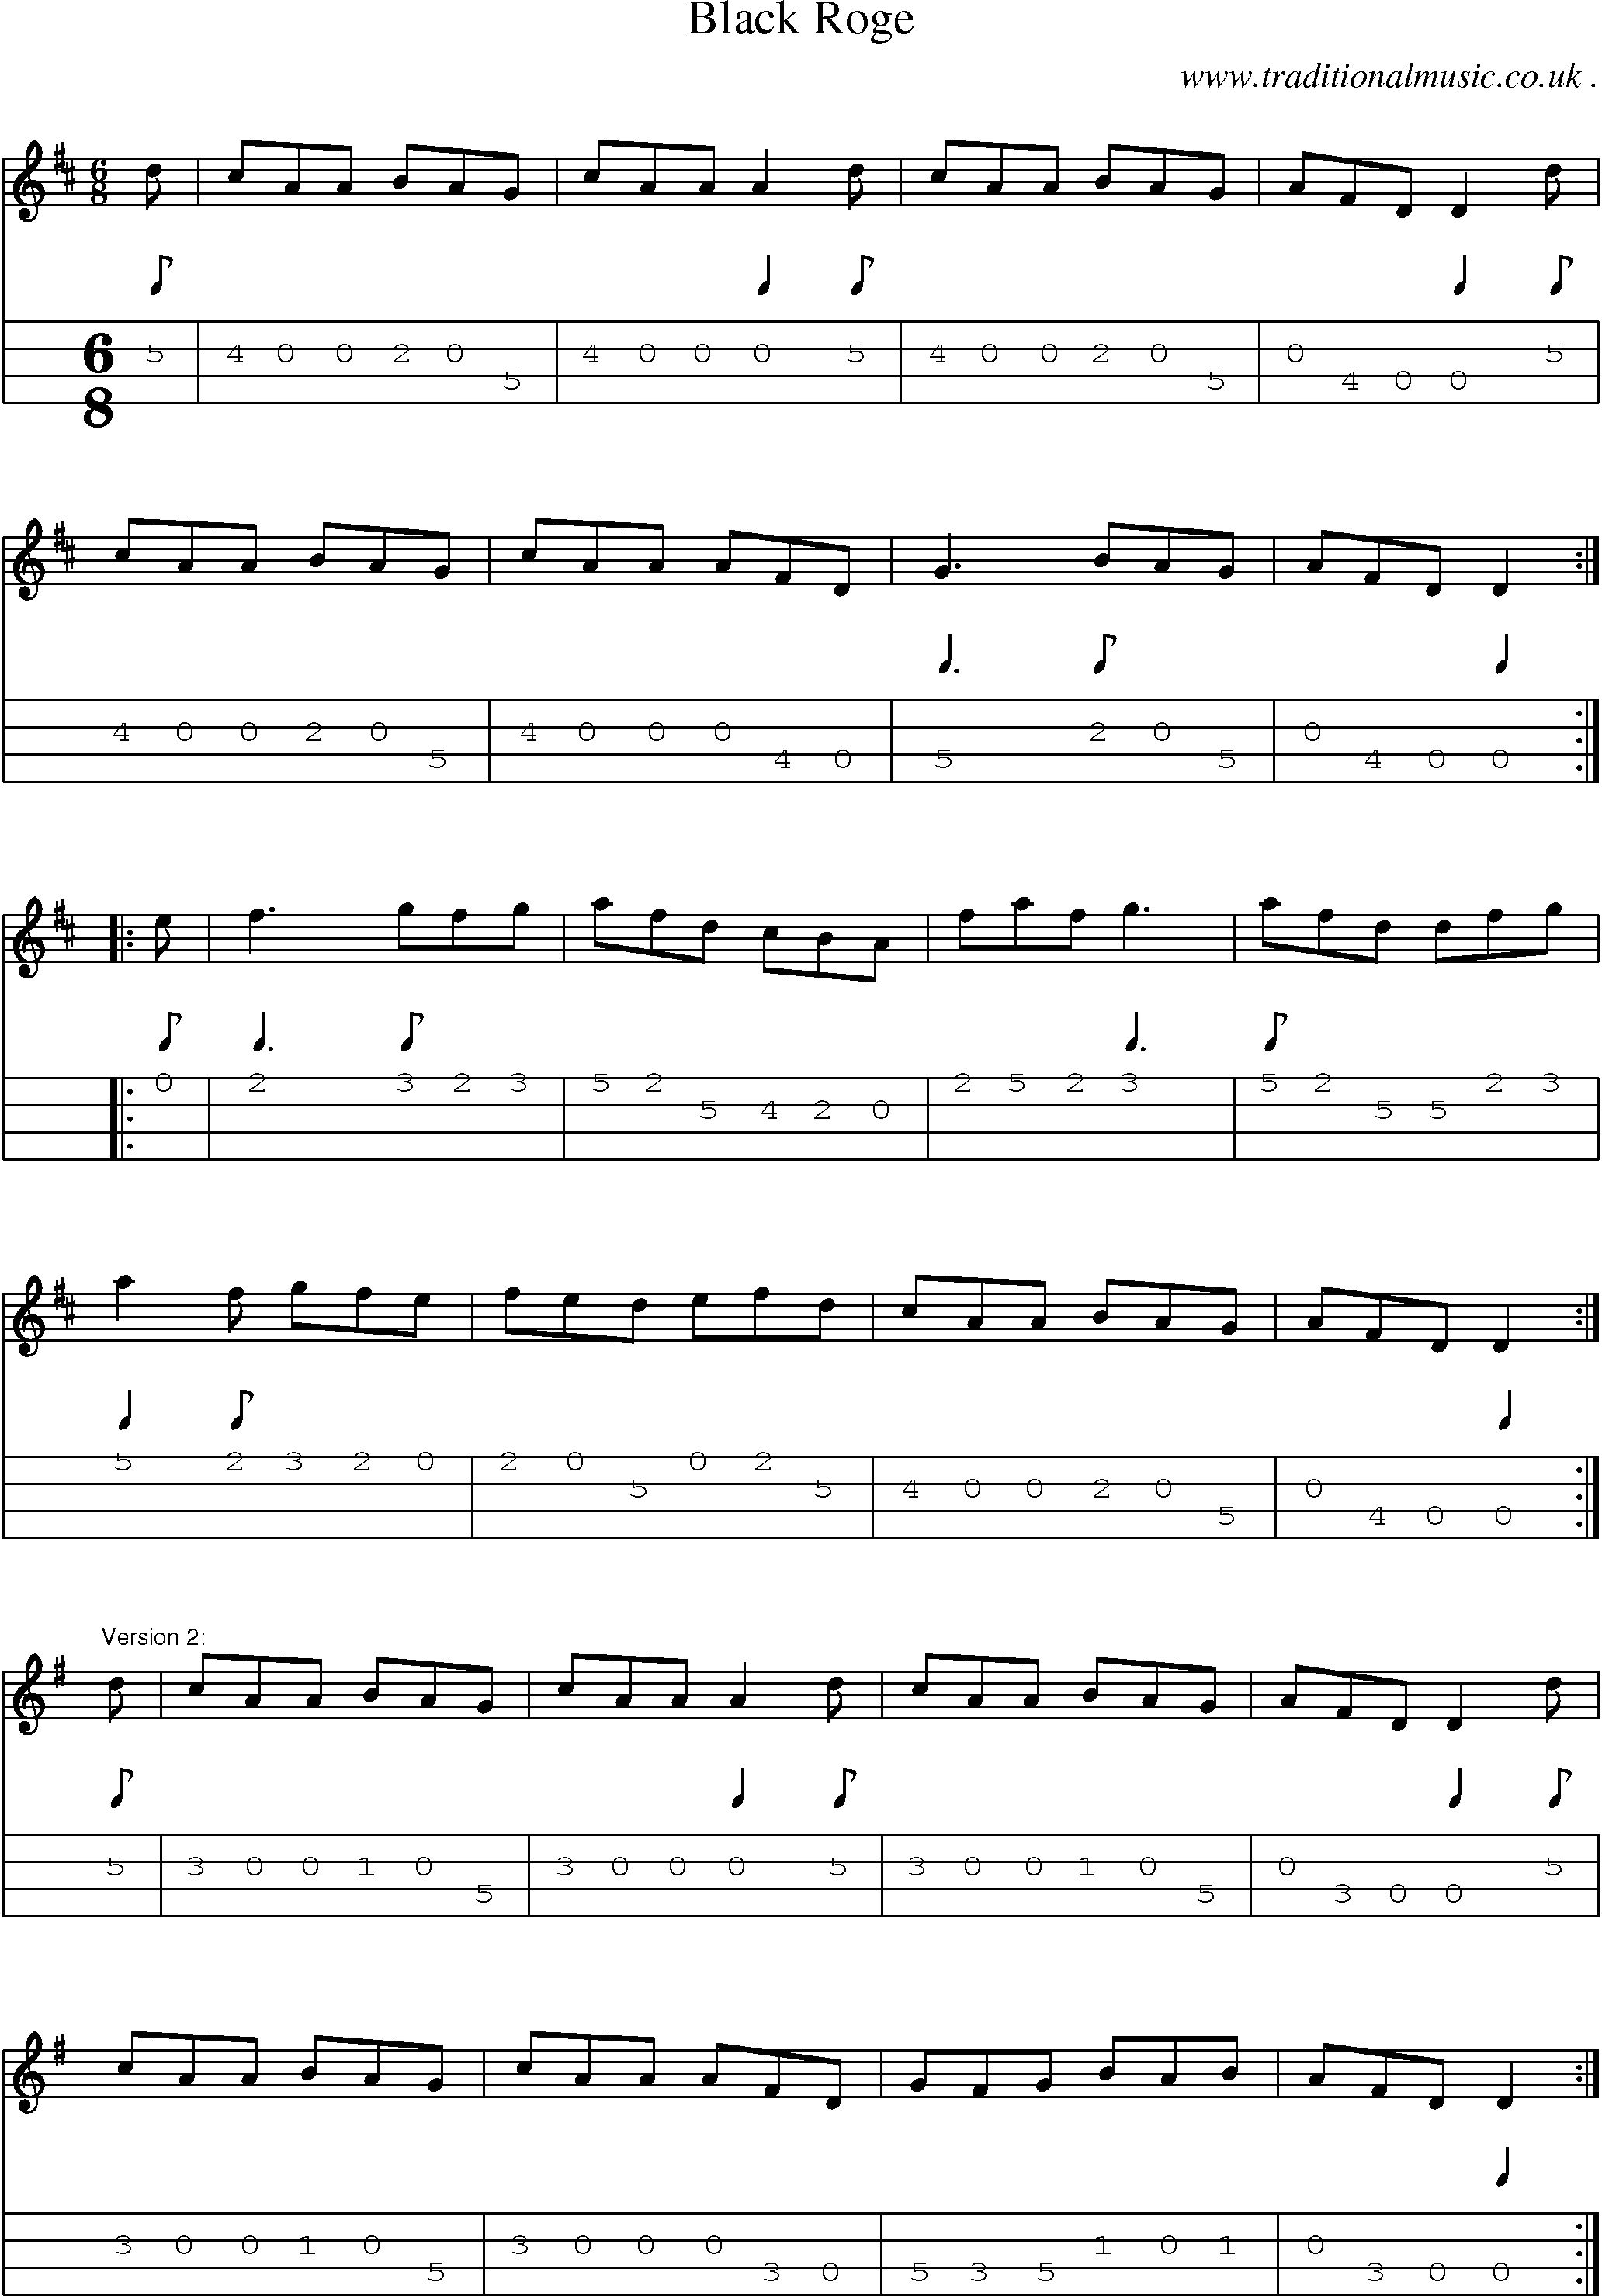 Sheet-Music and Mandolin Tabs for Black Roge